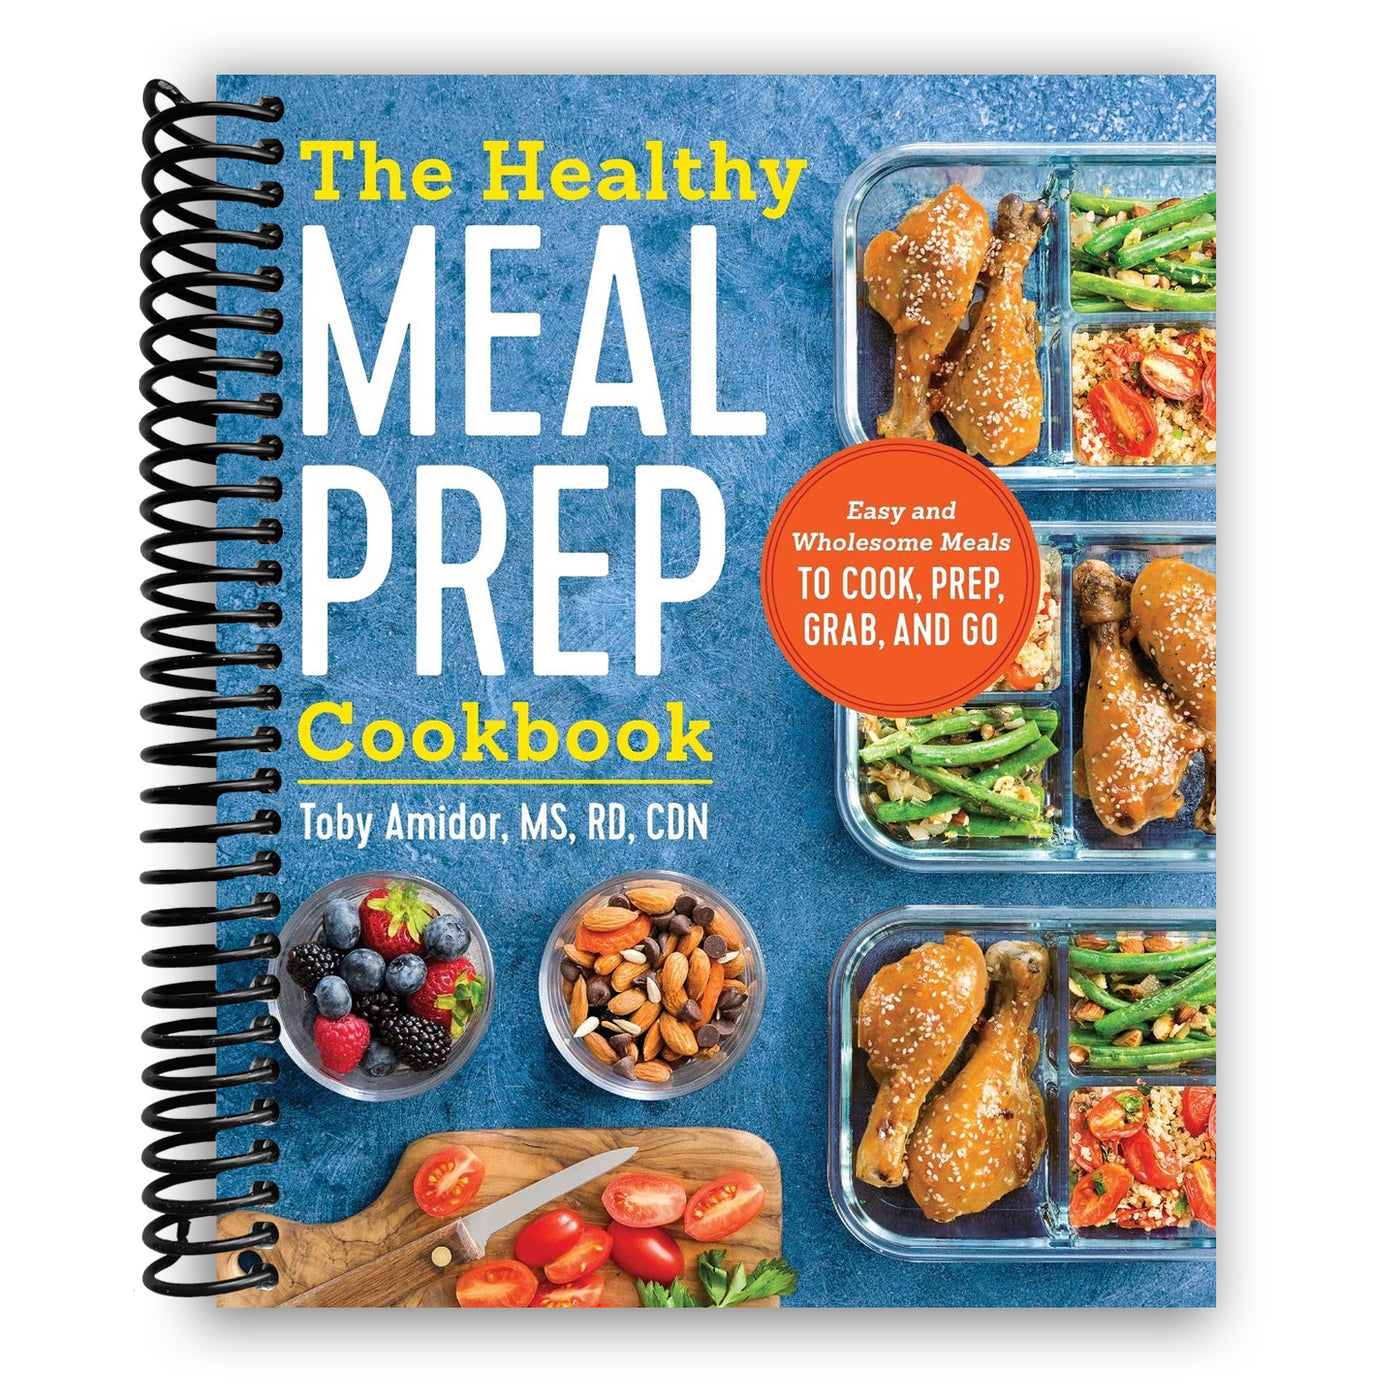 The Healthy Meal Prep Cookbook: Easy and Wholesome Meals to Cook, Prep, Grab, and Go (Spiral Bound)